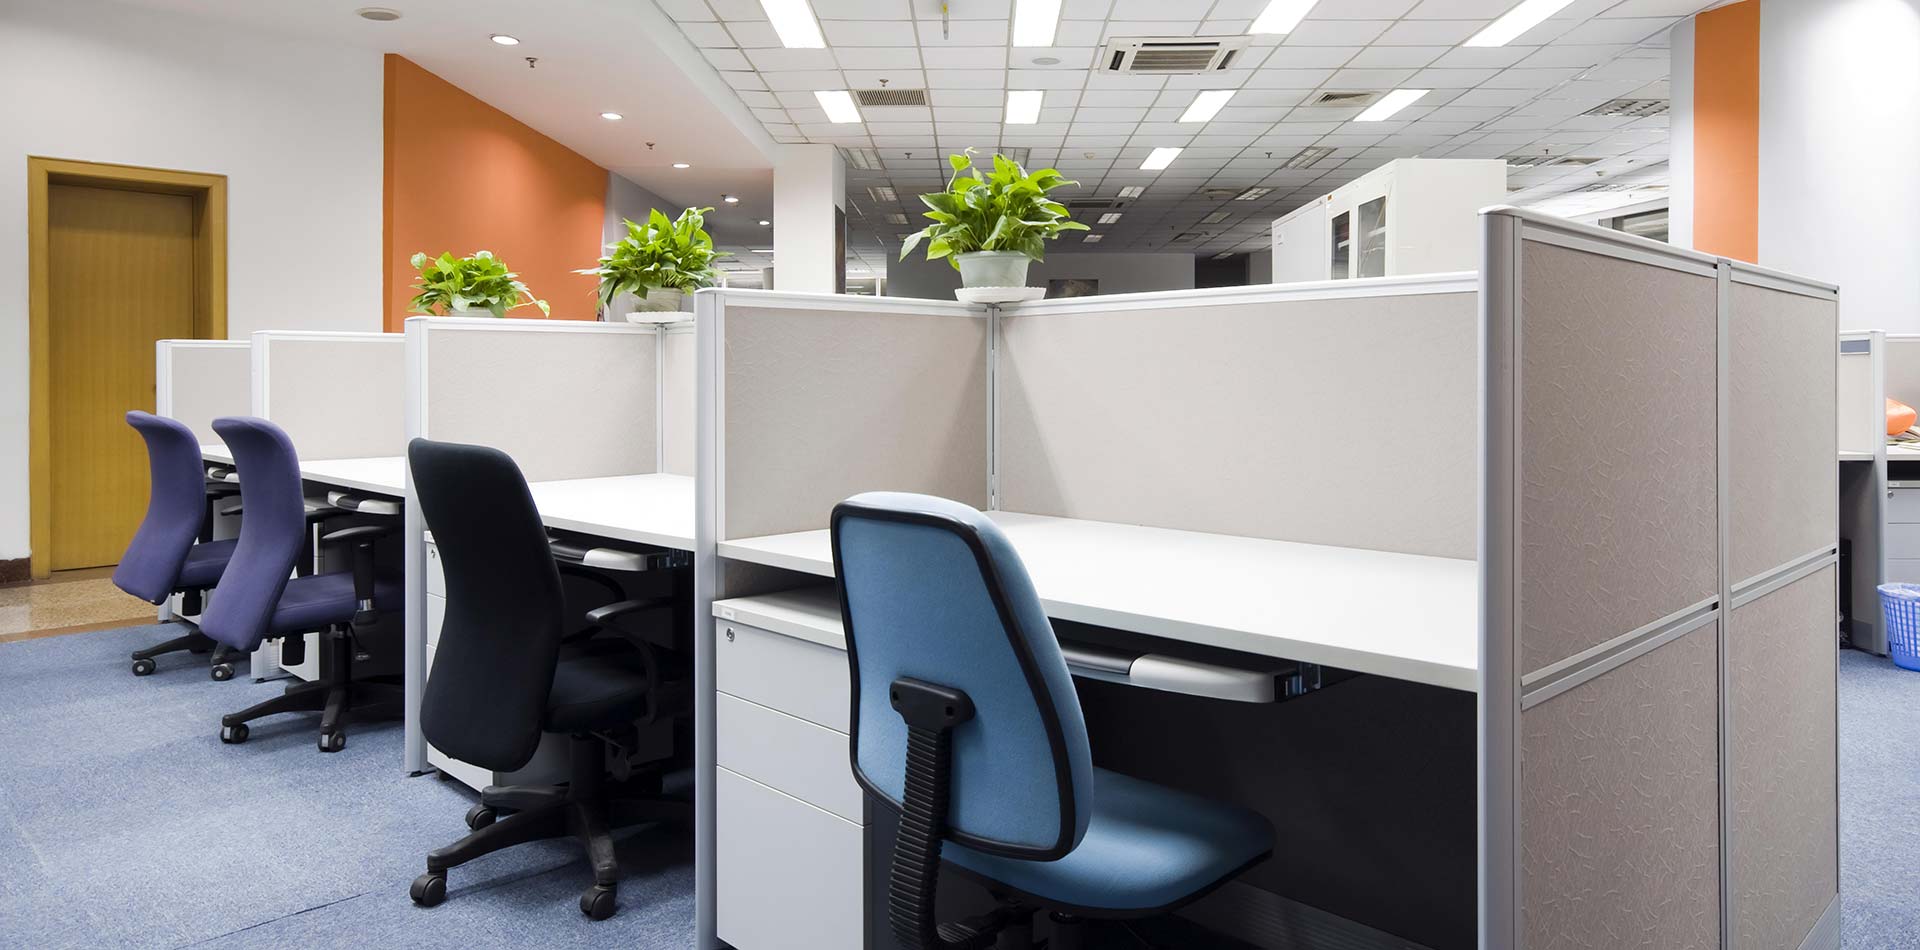 Office cubicles with chairs and a plant, safeguarded from pests by ELEET